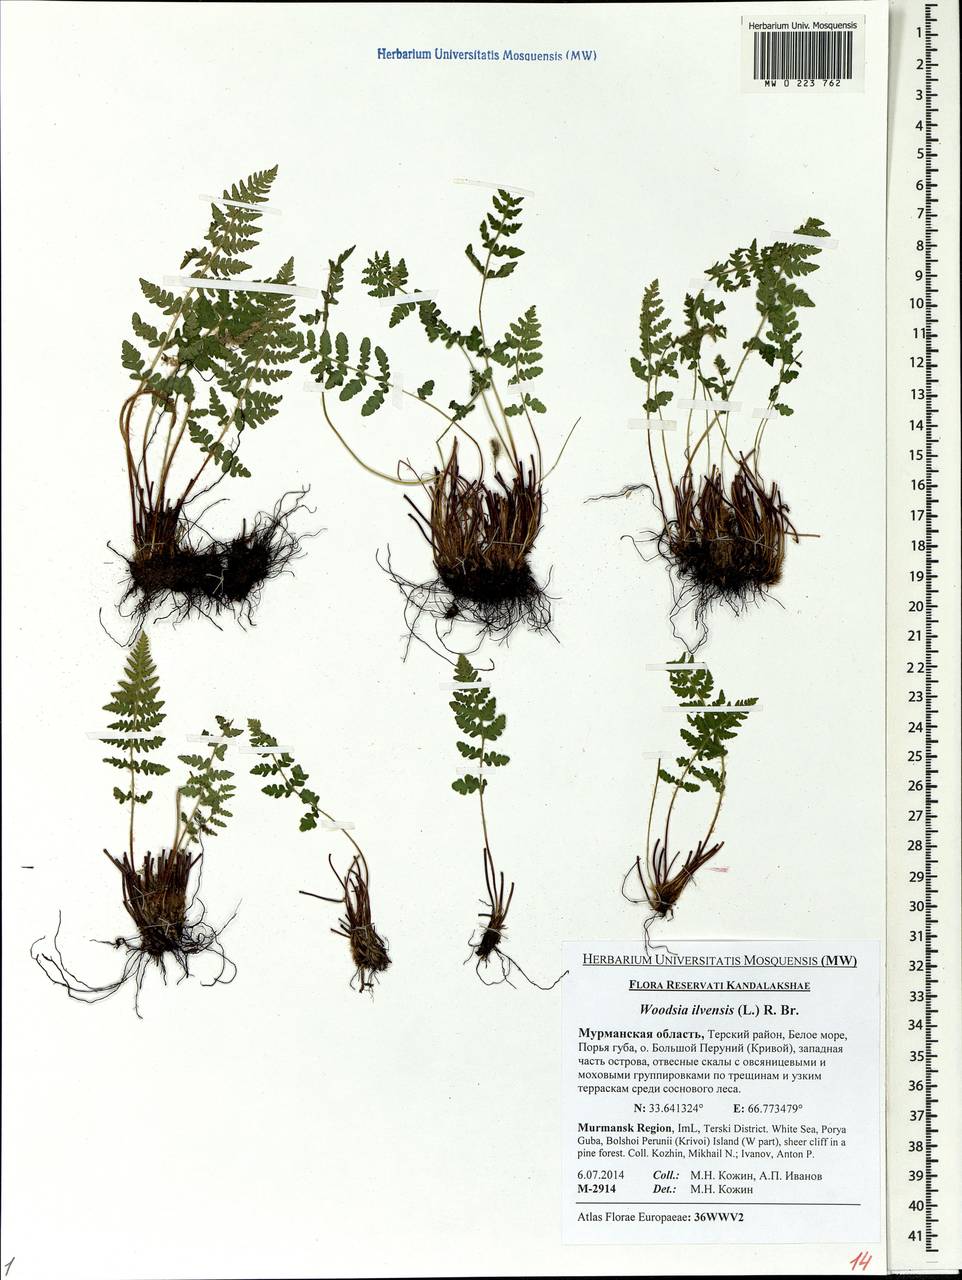 Woodsia ilvensis (L.) R. Br., Eastern Europe, Northern region (E1) (Russia)